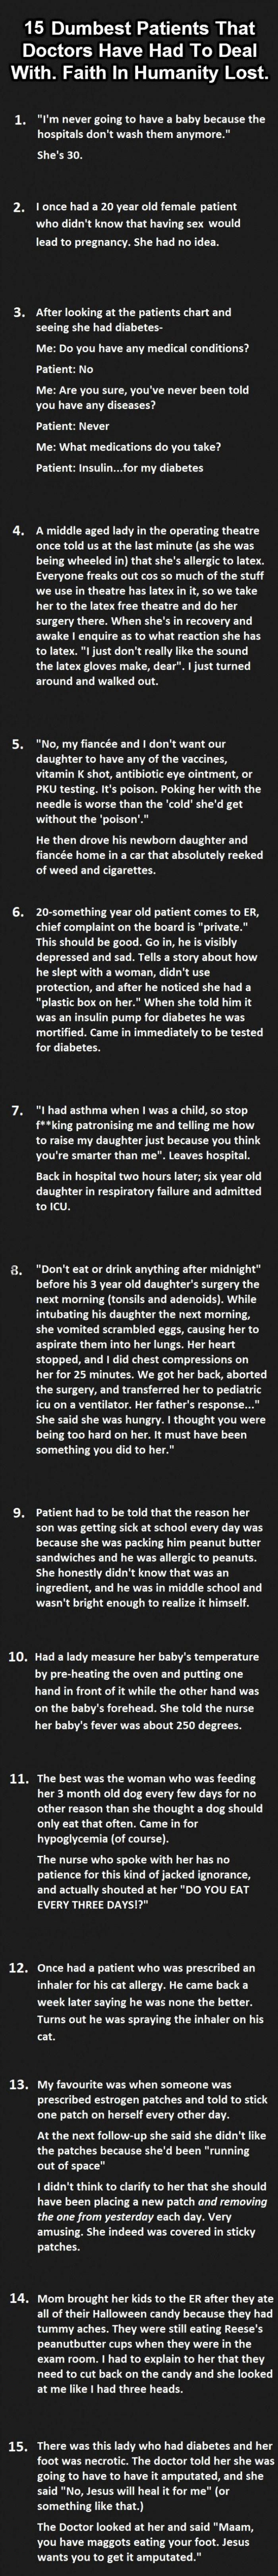 15 dumbest patients that doctors have had to deal with, faith in humanity lost